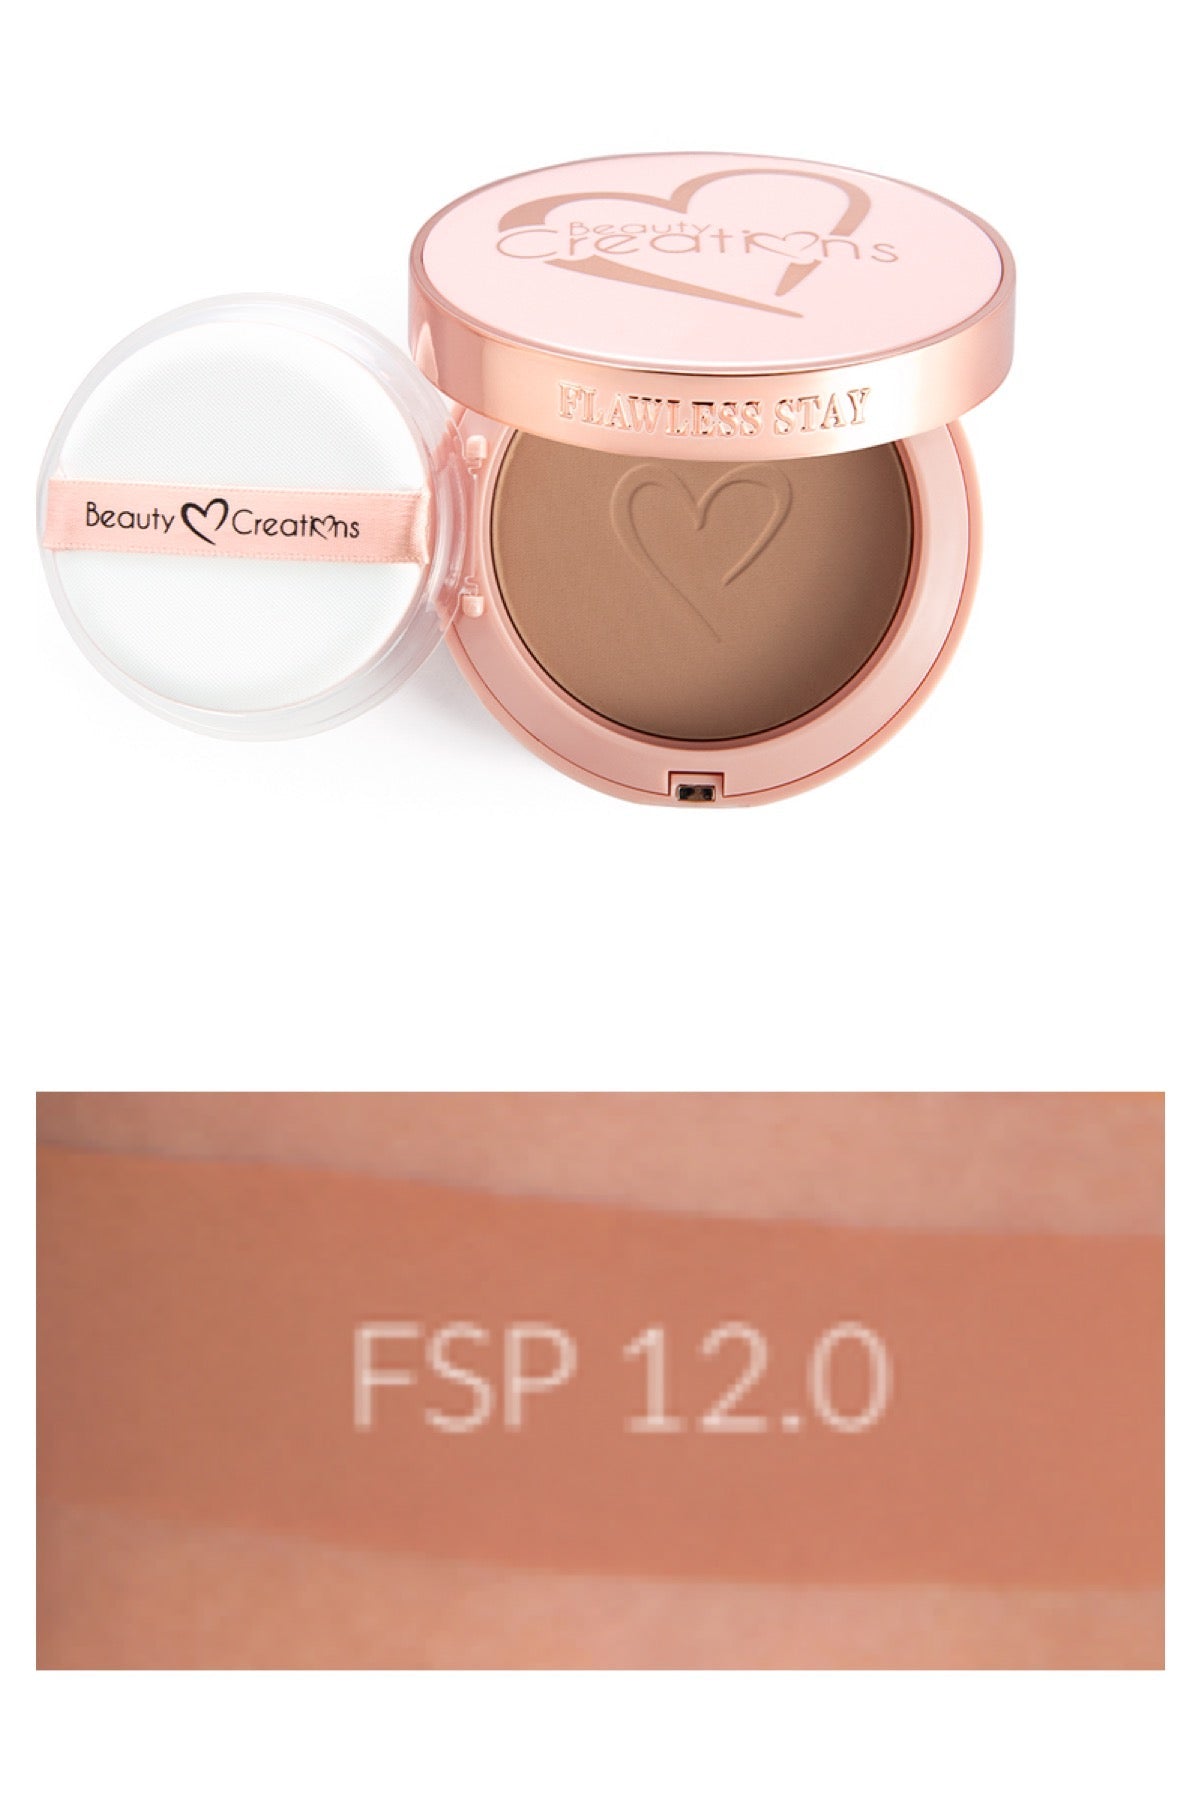 Flawless Stay Powder Foundations Vibe Clothing Company 12.0 